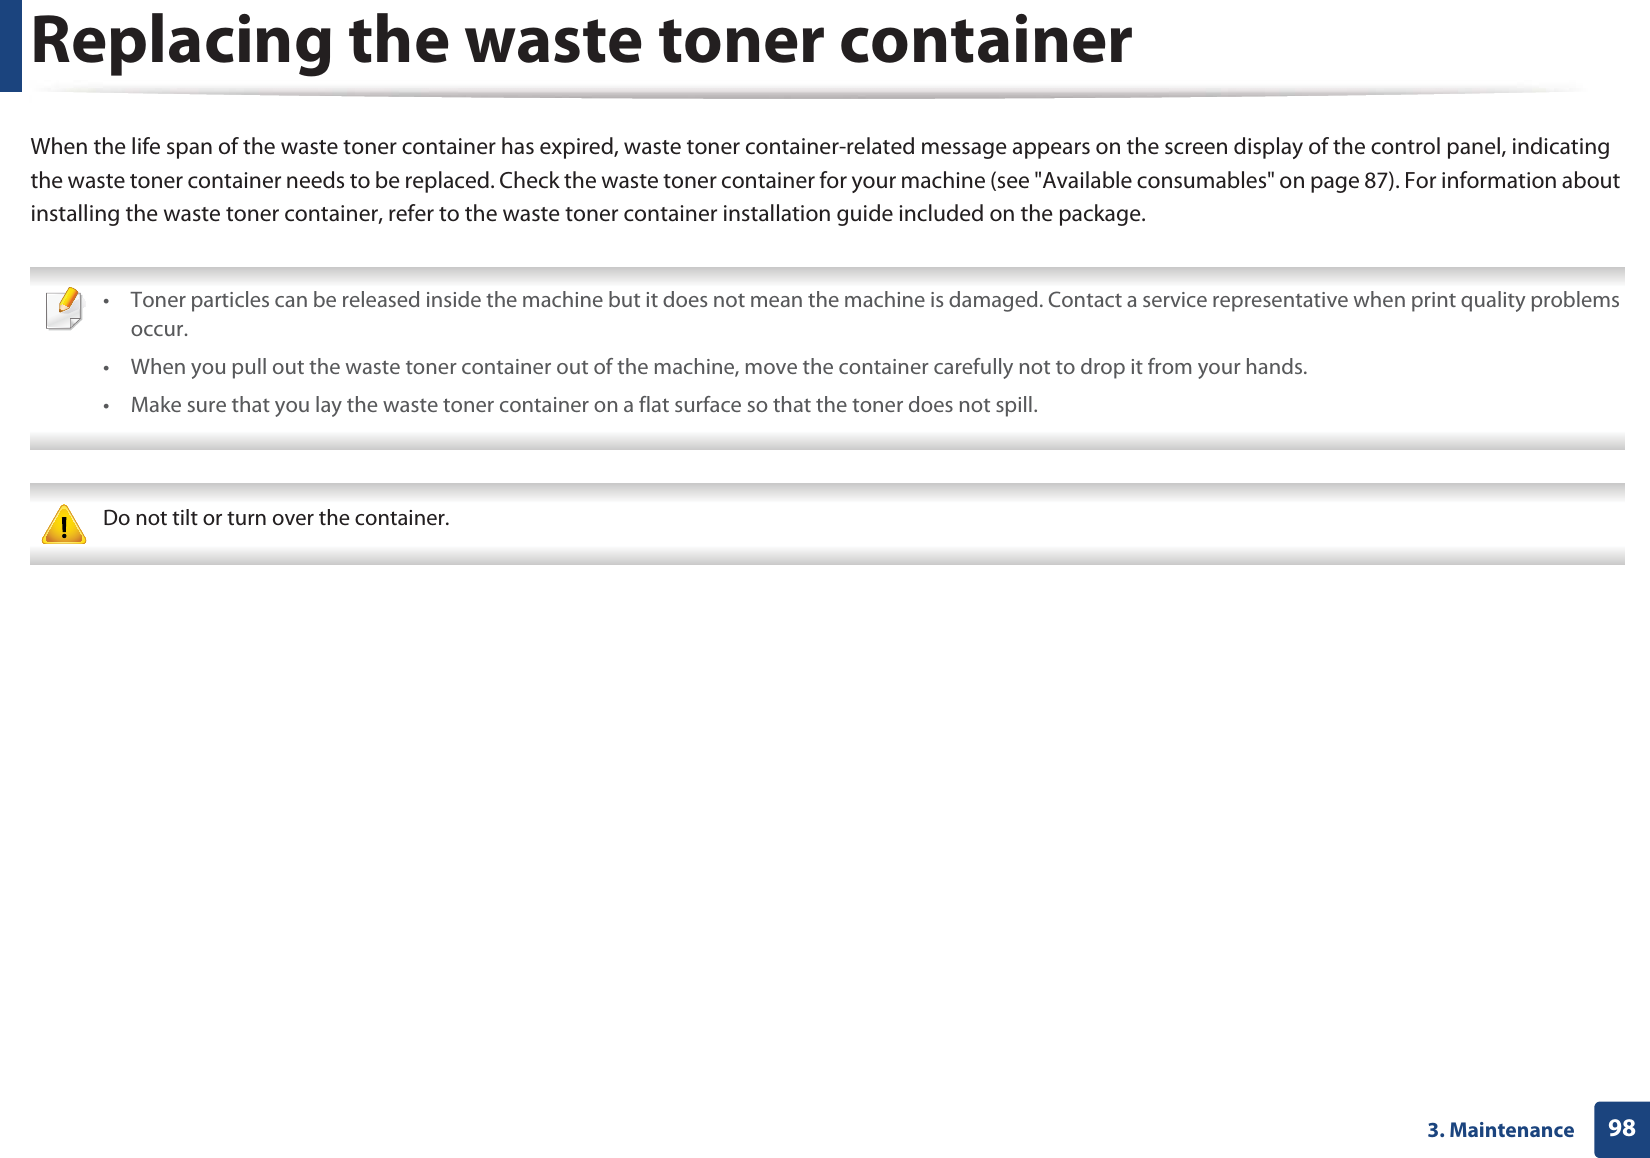 983. MaintenanceReplacing the waste toner containerWhen the life span of the waste toner container has expired, waste toner container-related message appears on the screen display of the control panel, indicating the waste toner container needs to be replaced. Check the waste toner container for your machine (see &quot;Available consumables&quot; on page 87). For information about installing the waste toner container, refer to the waste toner container installation guide included on the package. • Toner particles can be released inside the machine but it does not mean the machine is damaged. Contact a service representative when print quality problems occur.• When you pull out the waste toner container out of the machine, move the container carefully not to drop it from your hands.• Make sure that you lay the waste toner container on a flat surface so that the toner does not spill.  Do not tilt or turn over the container. 